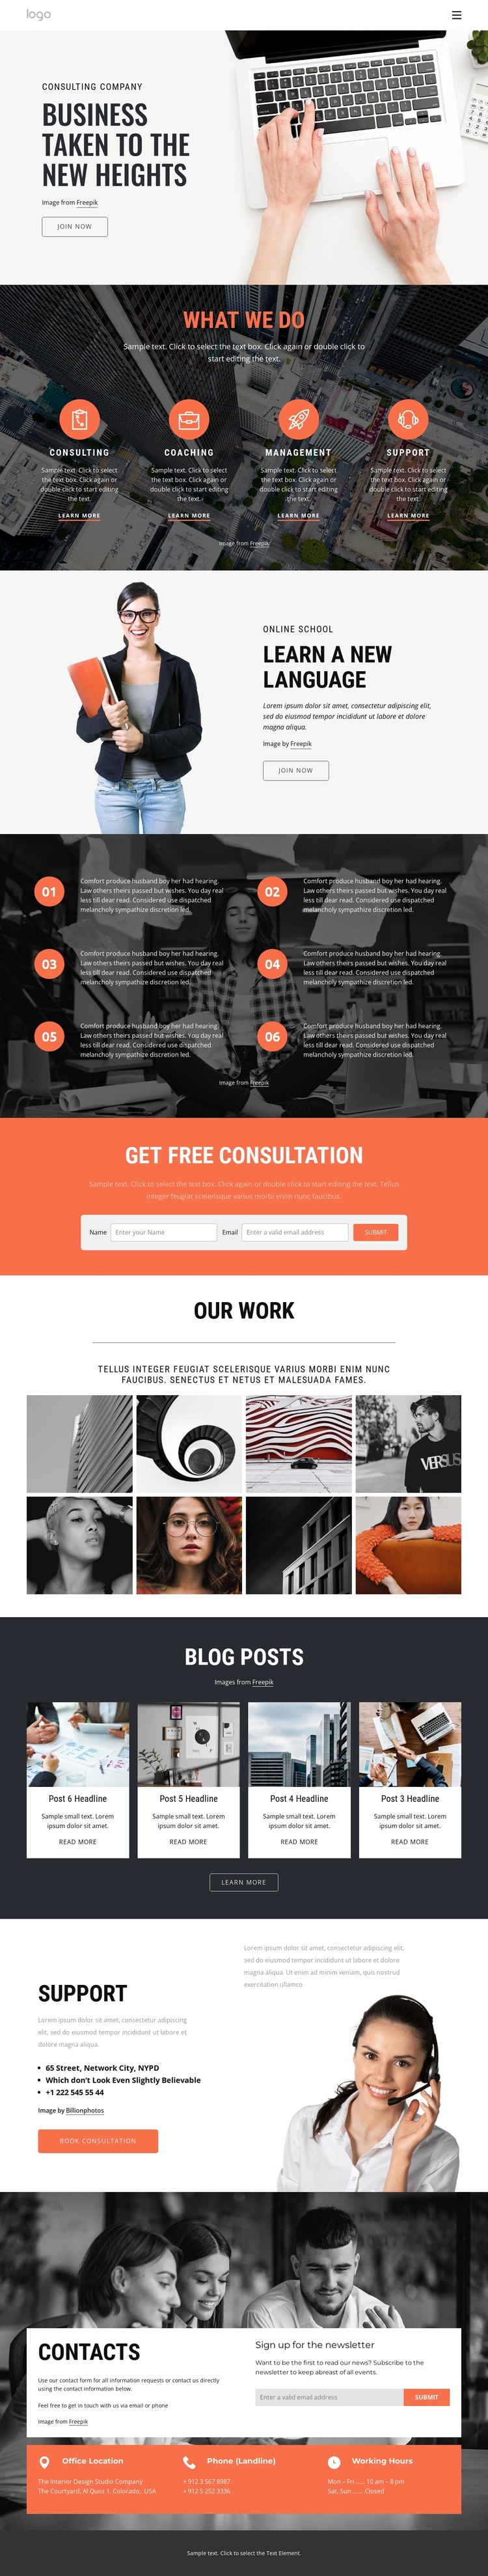 How consulting helps to speed up success HTML5 Template